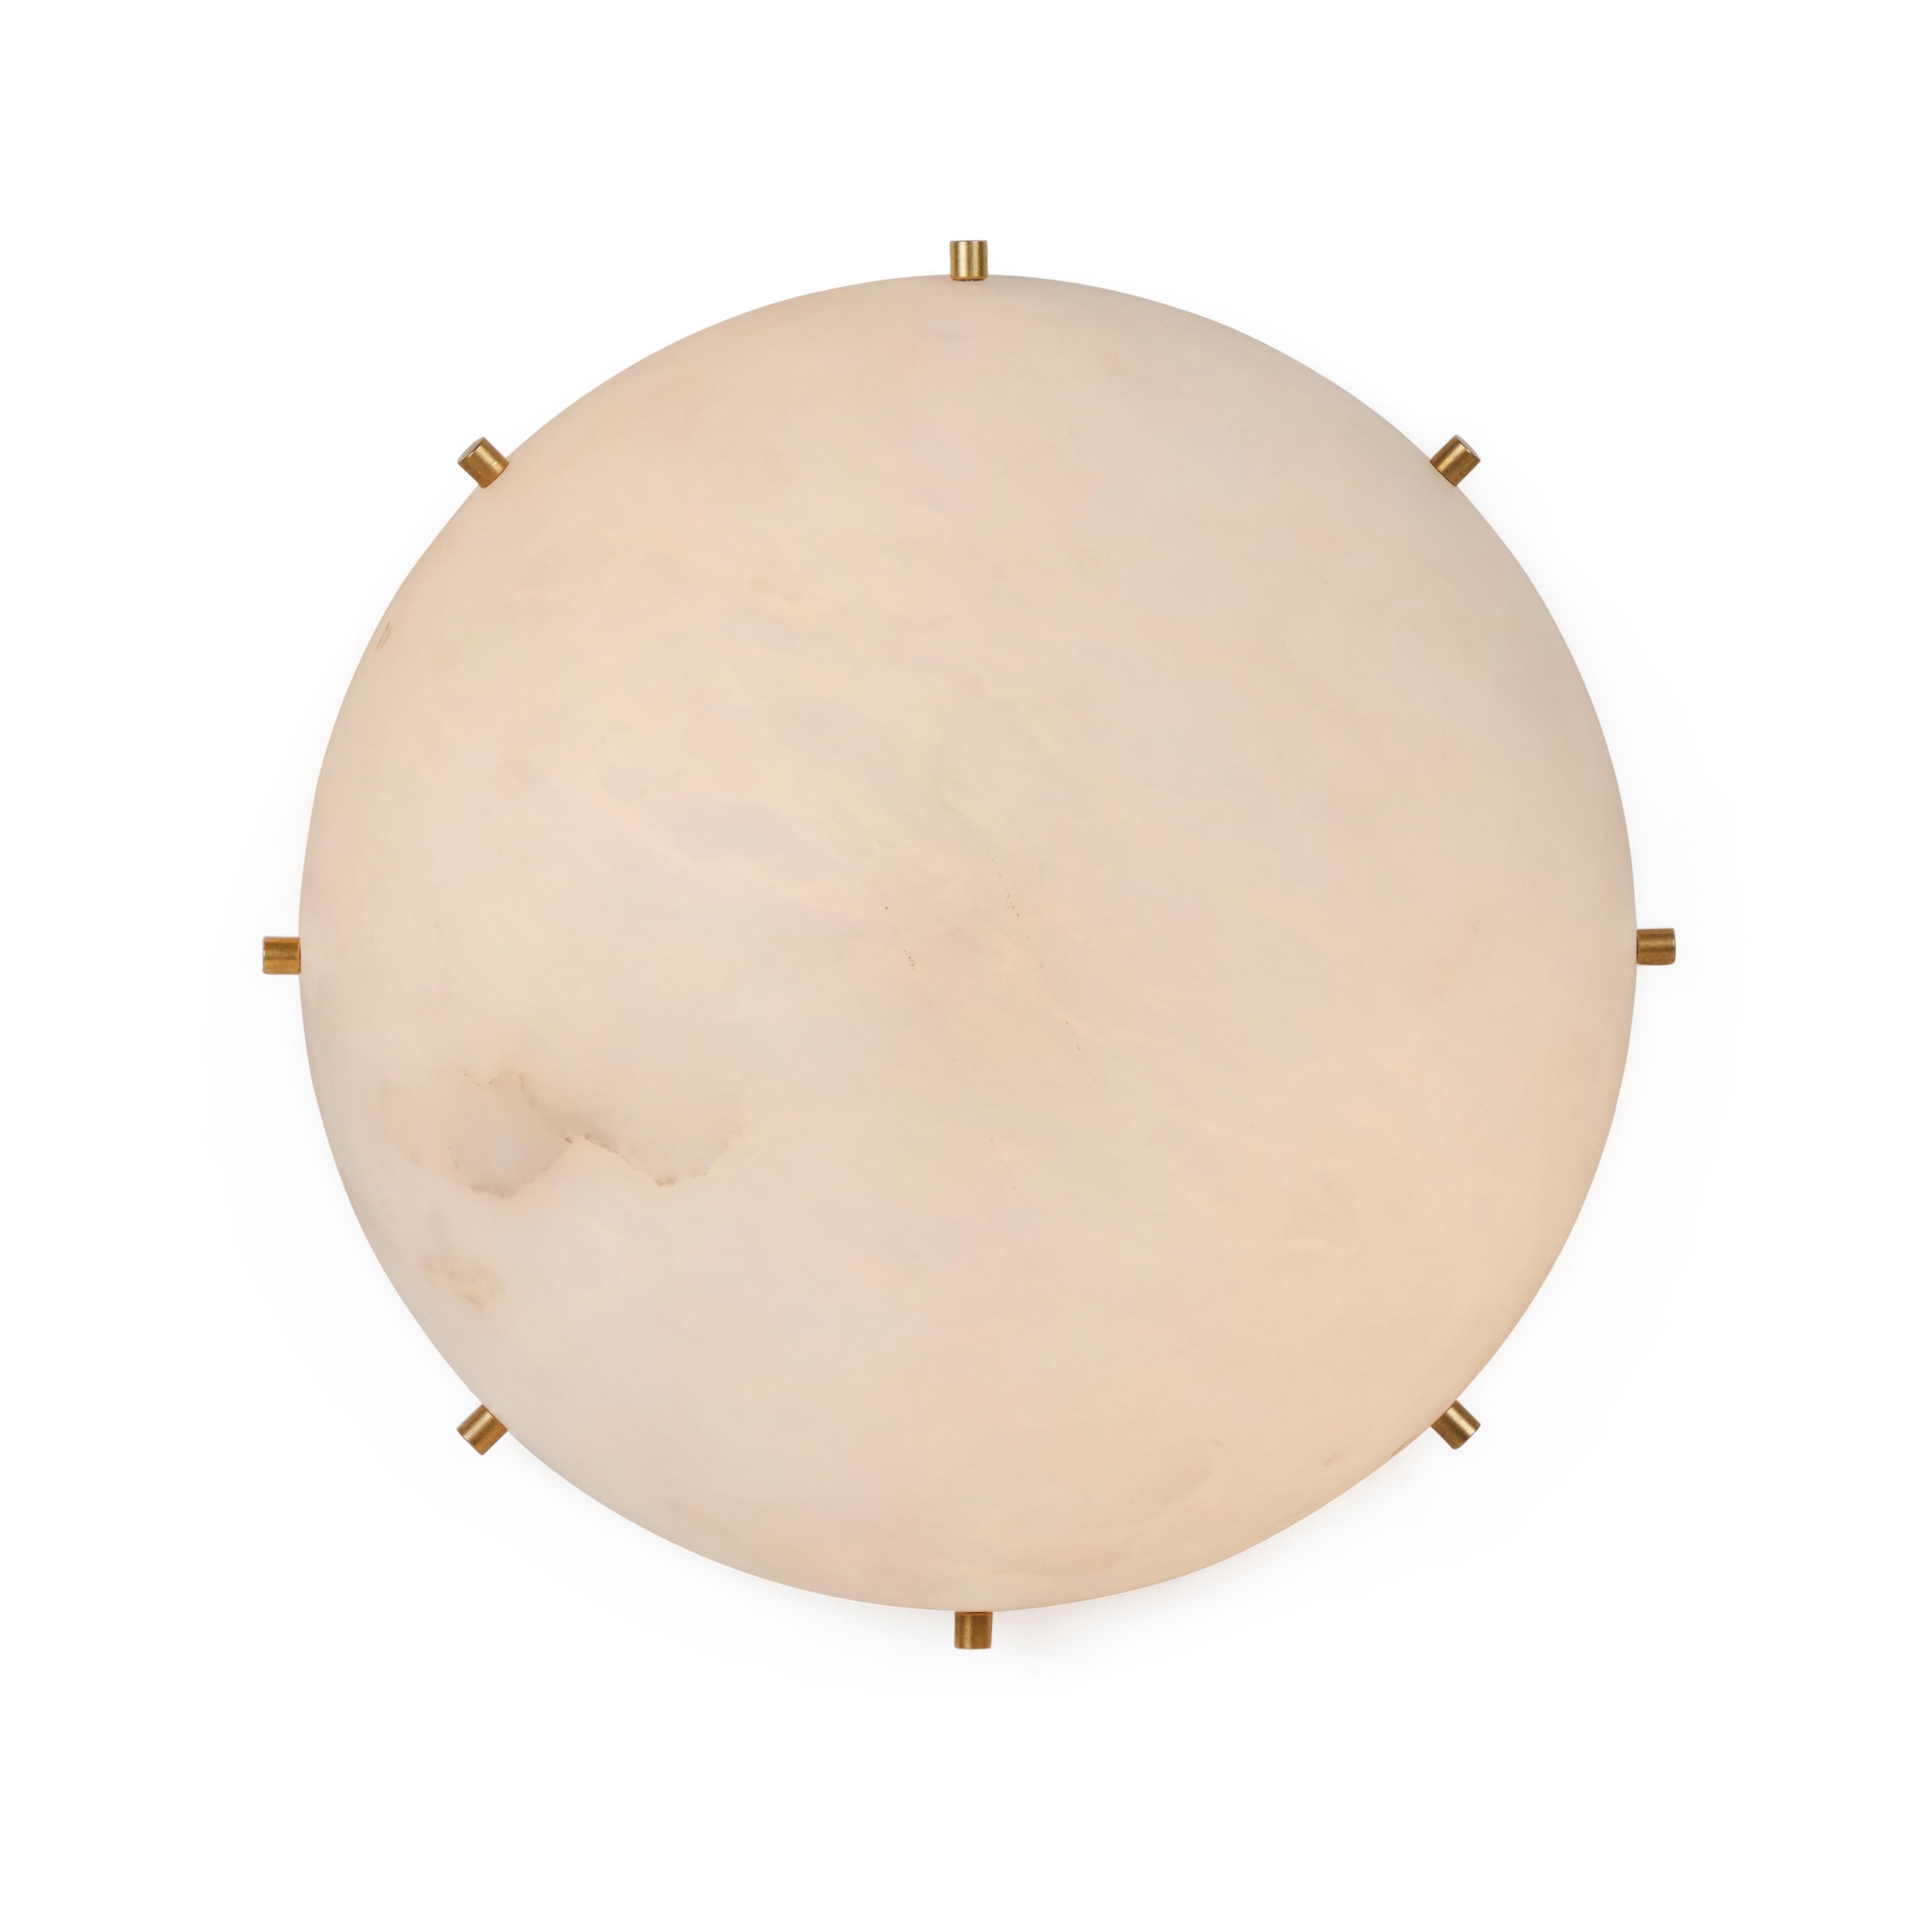 'Moon 8' Alabaster Ceiling or Wall Lamp by Denis De La Mesiere In New Condition For Sale In Glendale, CA